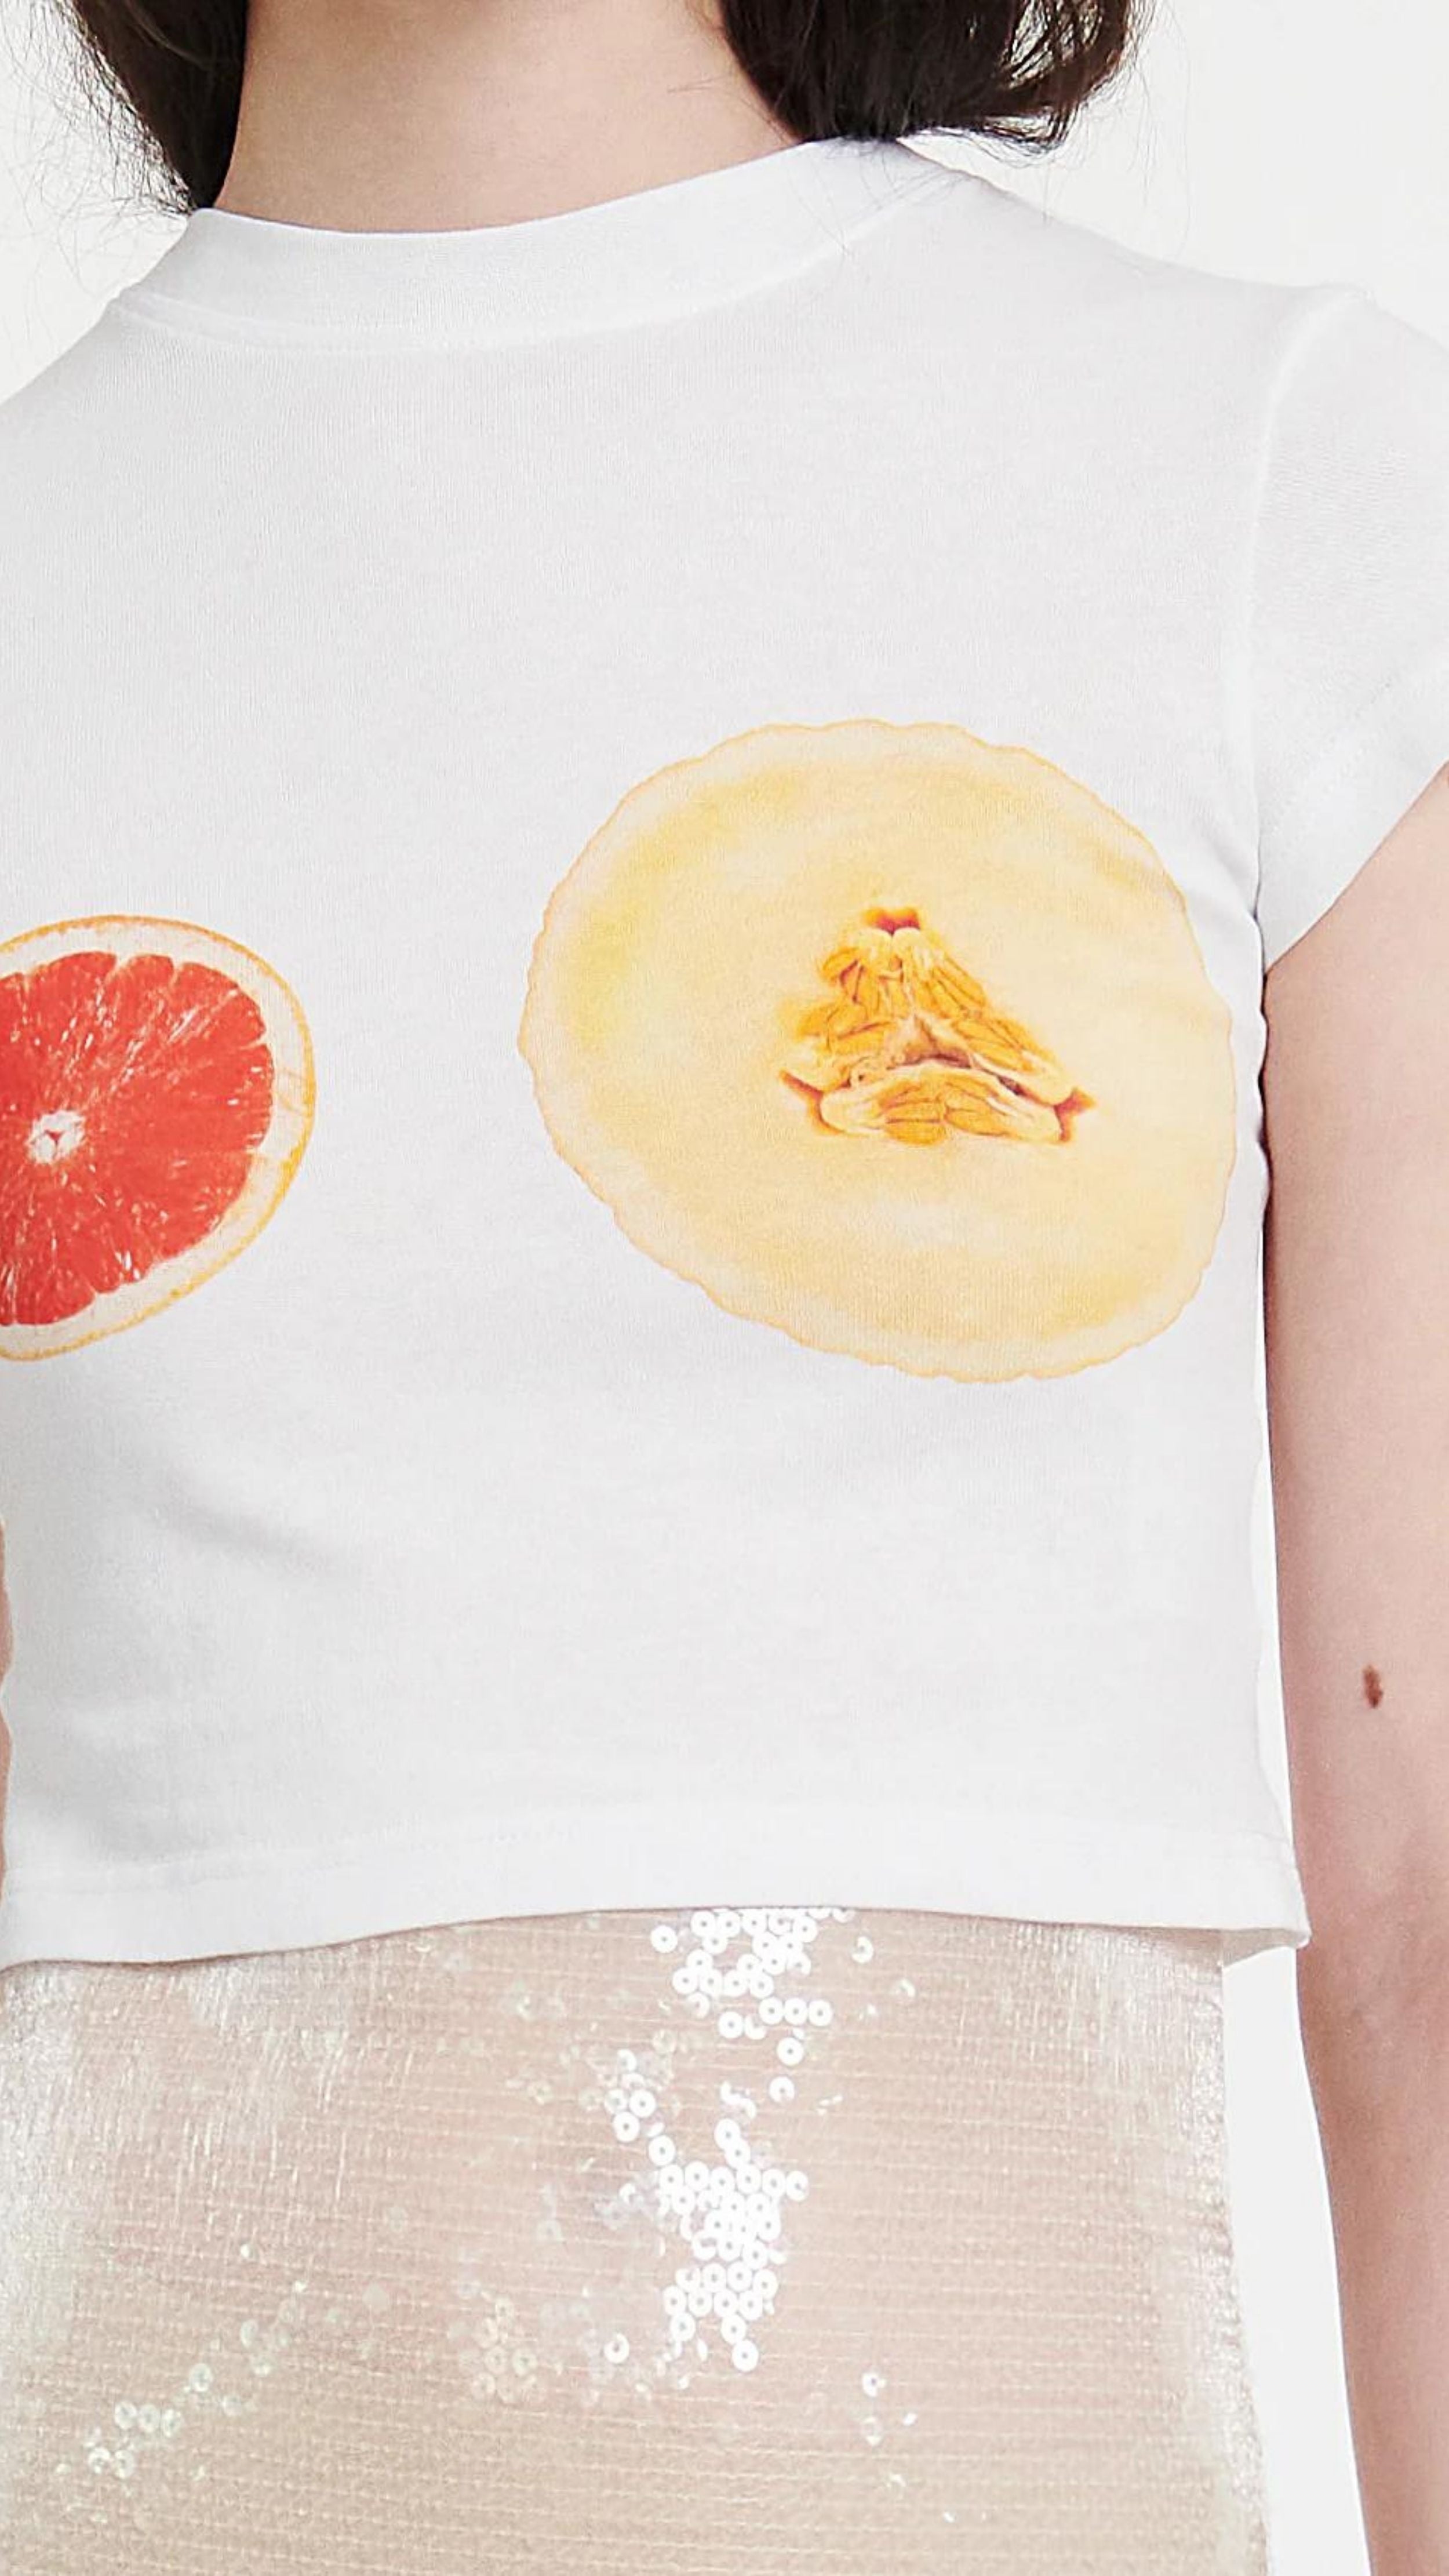 AWAKE Mode Cropped Fitted T-Shirt with Fruit Print. Cropped white tee shirt made from organic cotton with cap sleeves and a slim fit. The front shows grapefruit and melon at the chest. Close up photo of fruit print.